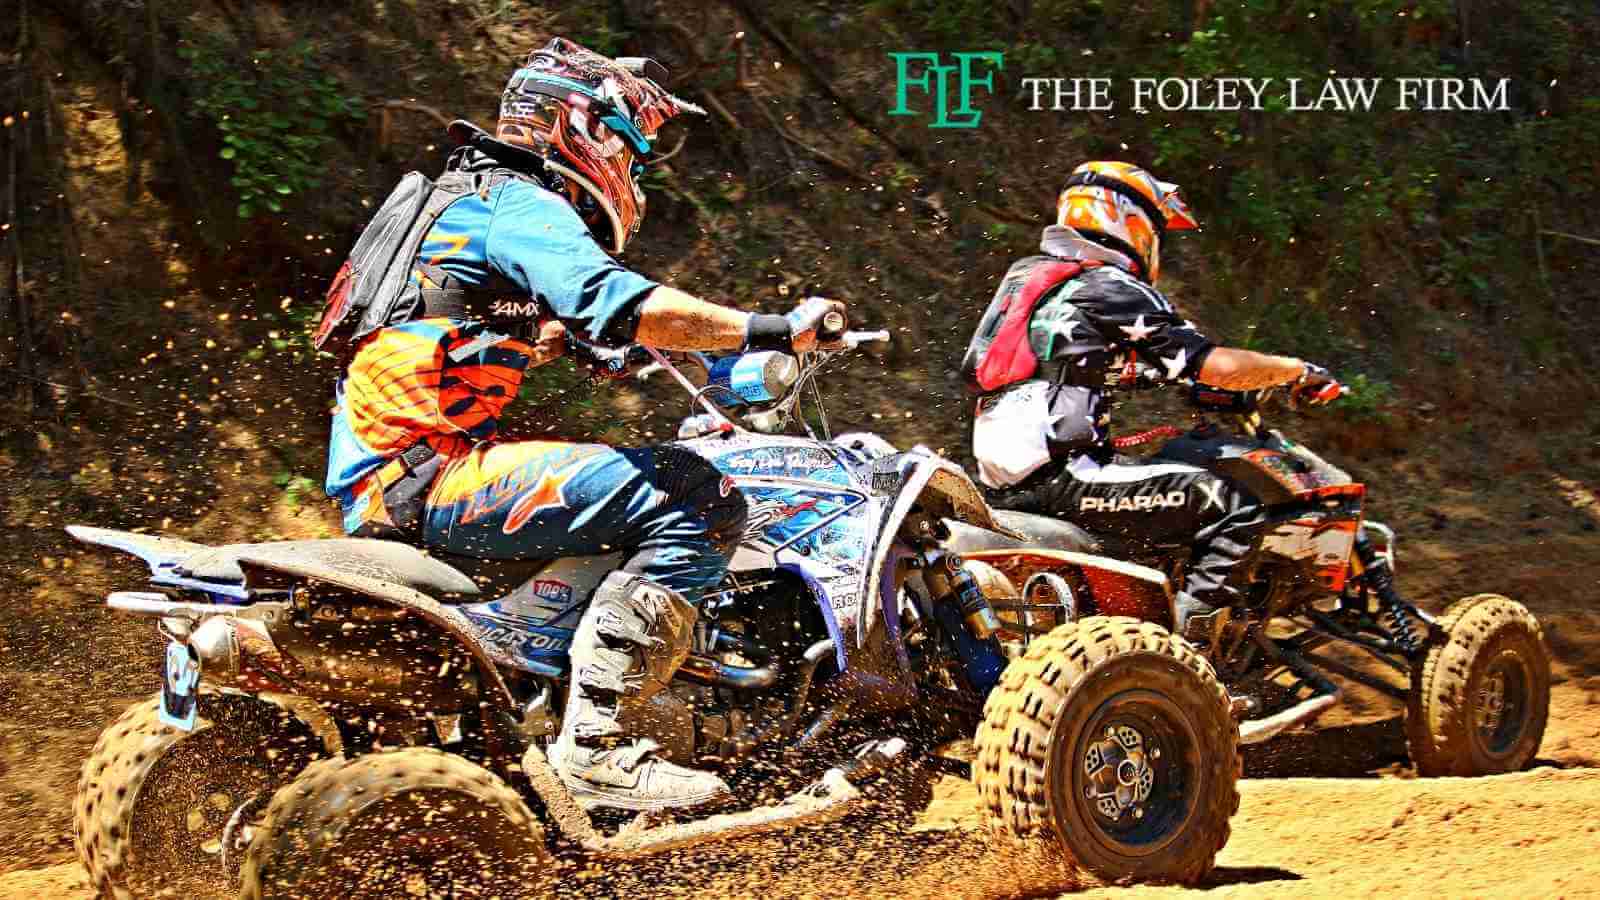 Are severe injuries common in ATV accidents?